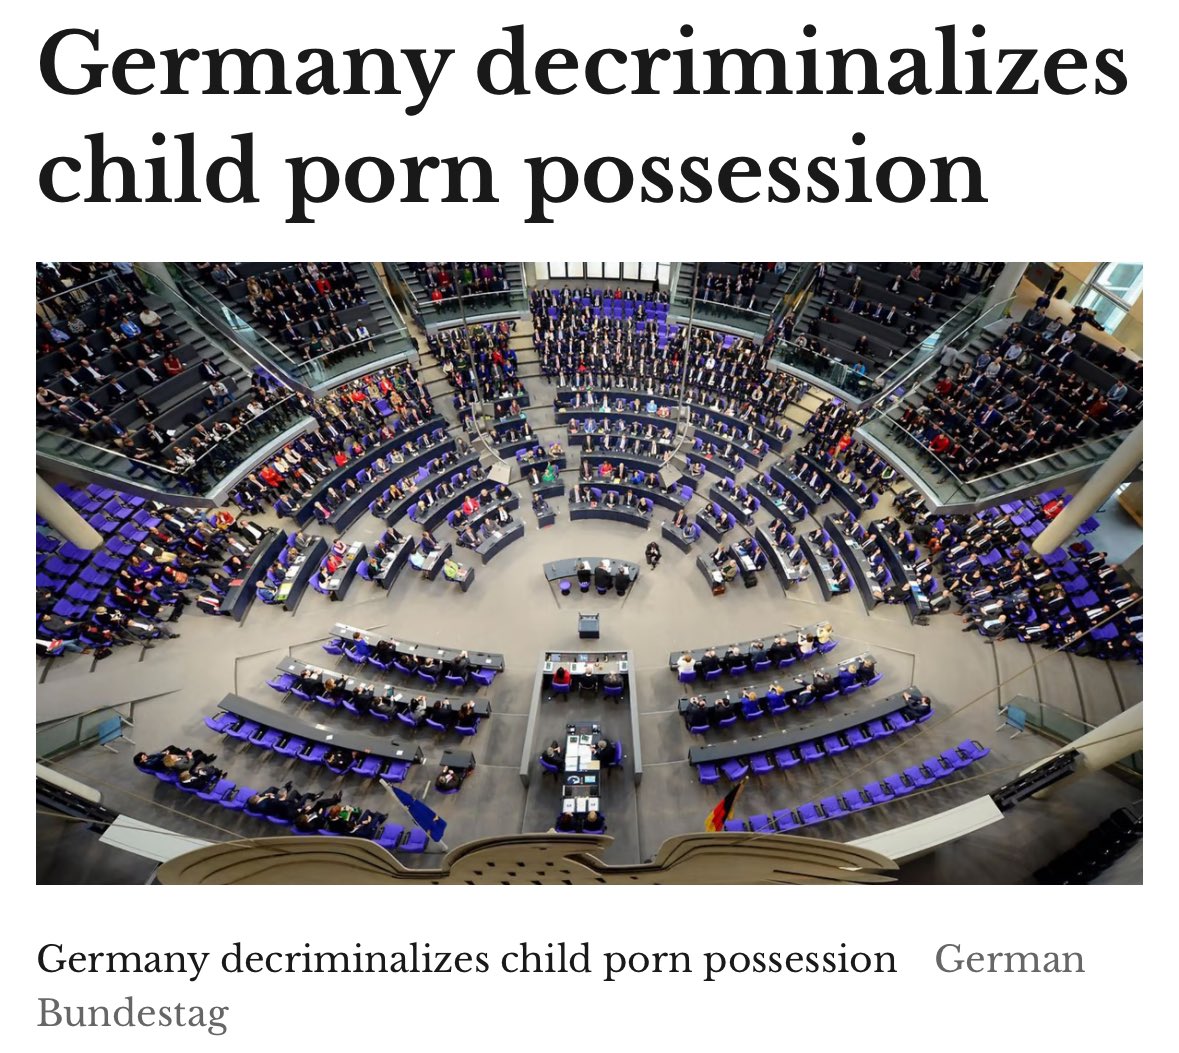 Utterly disgusting! The same German left-wing government has taken perverse pleasure in tormenting children during Covid with masks, PCR testing, social isolation, and injections.